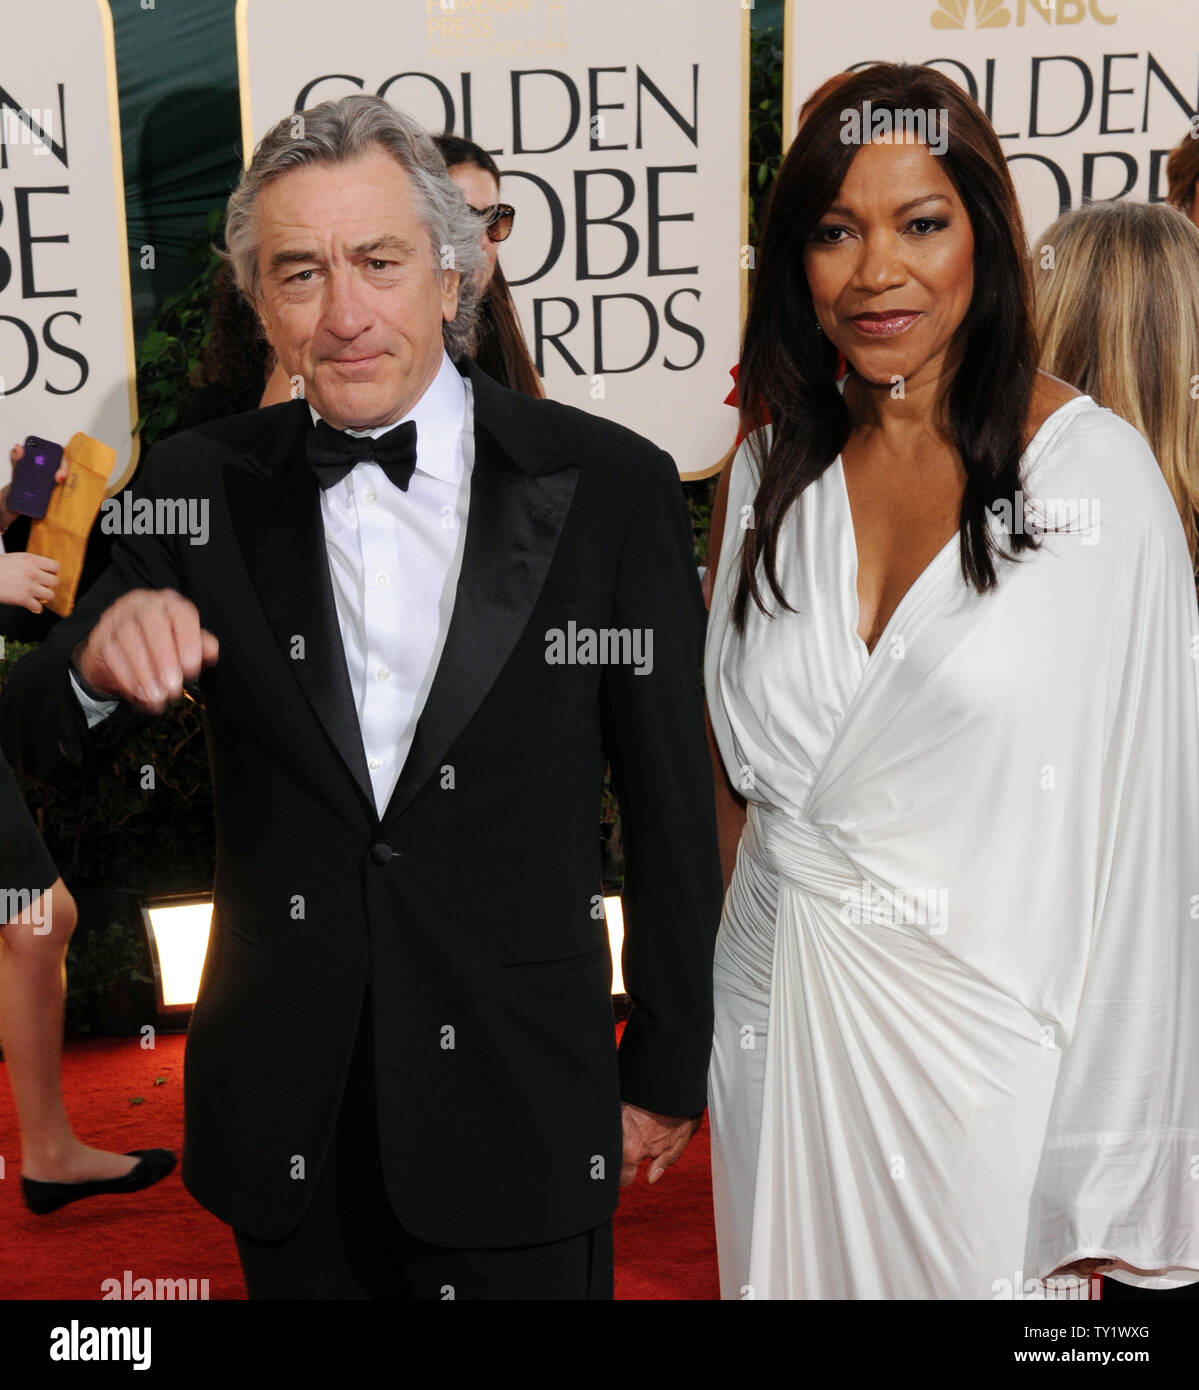 Actor Robert De Niro and his wife Grace Hightower arrive at the 68th annual Golden Globe Awards in Beverly Hills, California on January 16, 2011. De Niro was honored with the Cecil B. DeMille Award.  UPI/Jim Ruymen Stock Photo